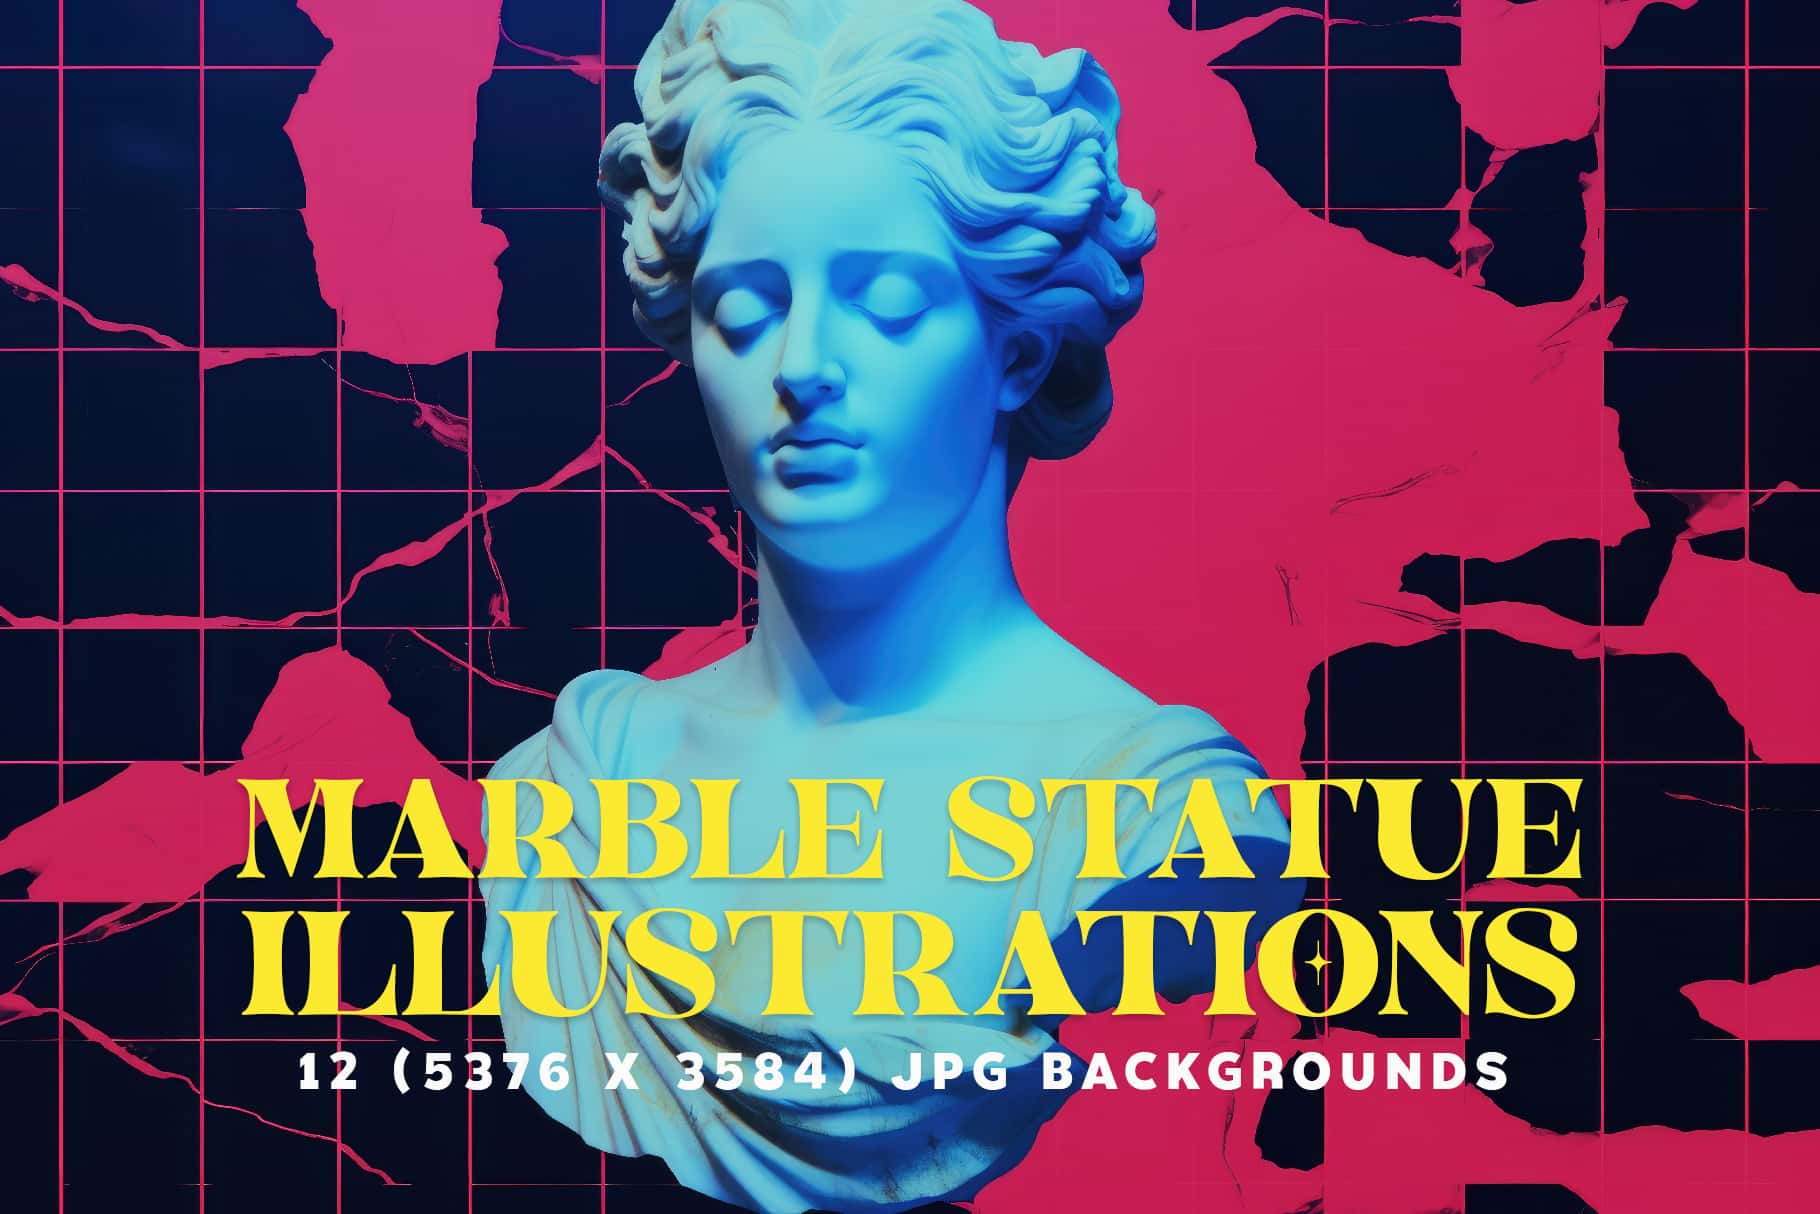 Marble Statue Illustrations Cover